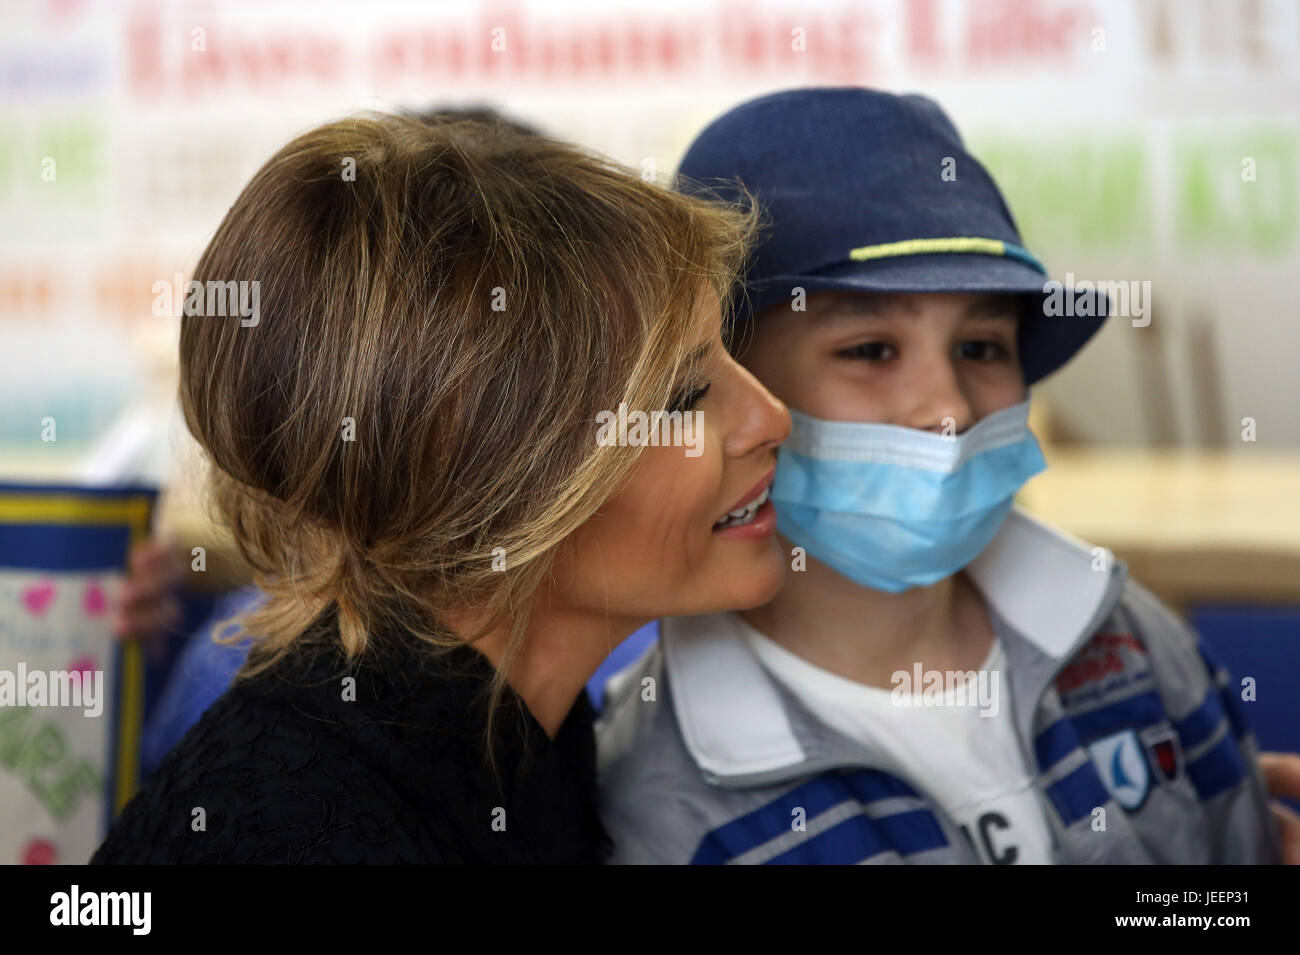 U.S. First Lady Melania Trump visits the Pediatric Hospital Bambin Gesu in  Vatican City Featuring: Melania Trump Where: Rome, Italy When: 24 May 2017  Credit: IPA/WENN.com **Only available for publication in UK,